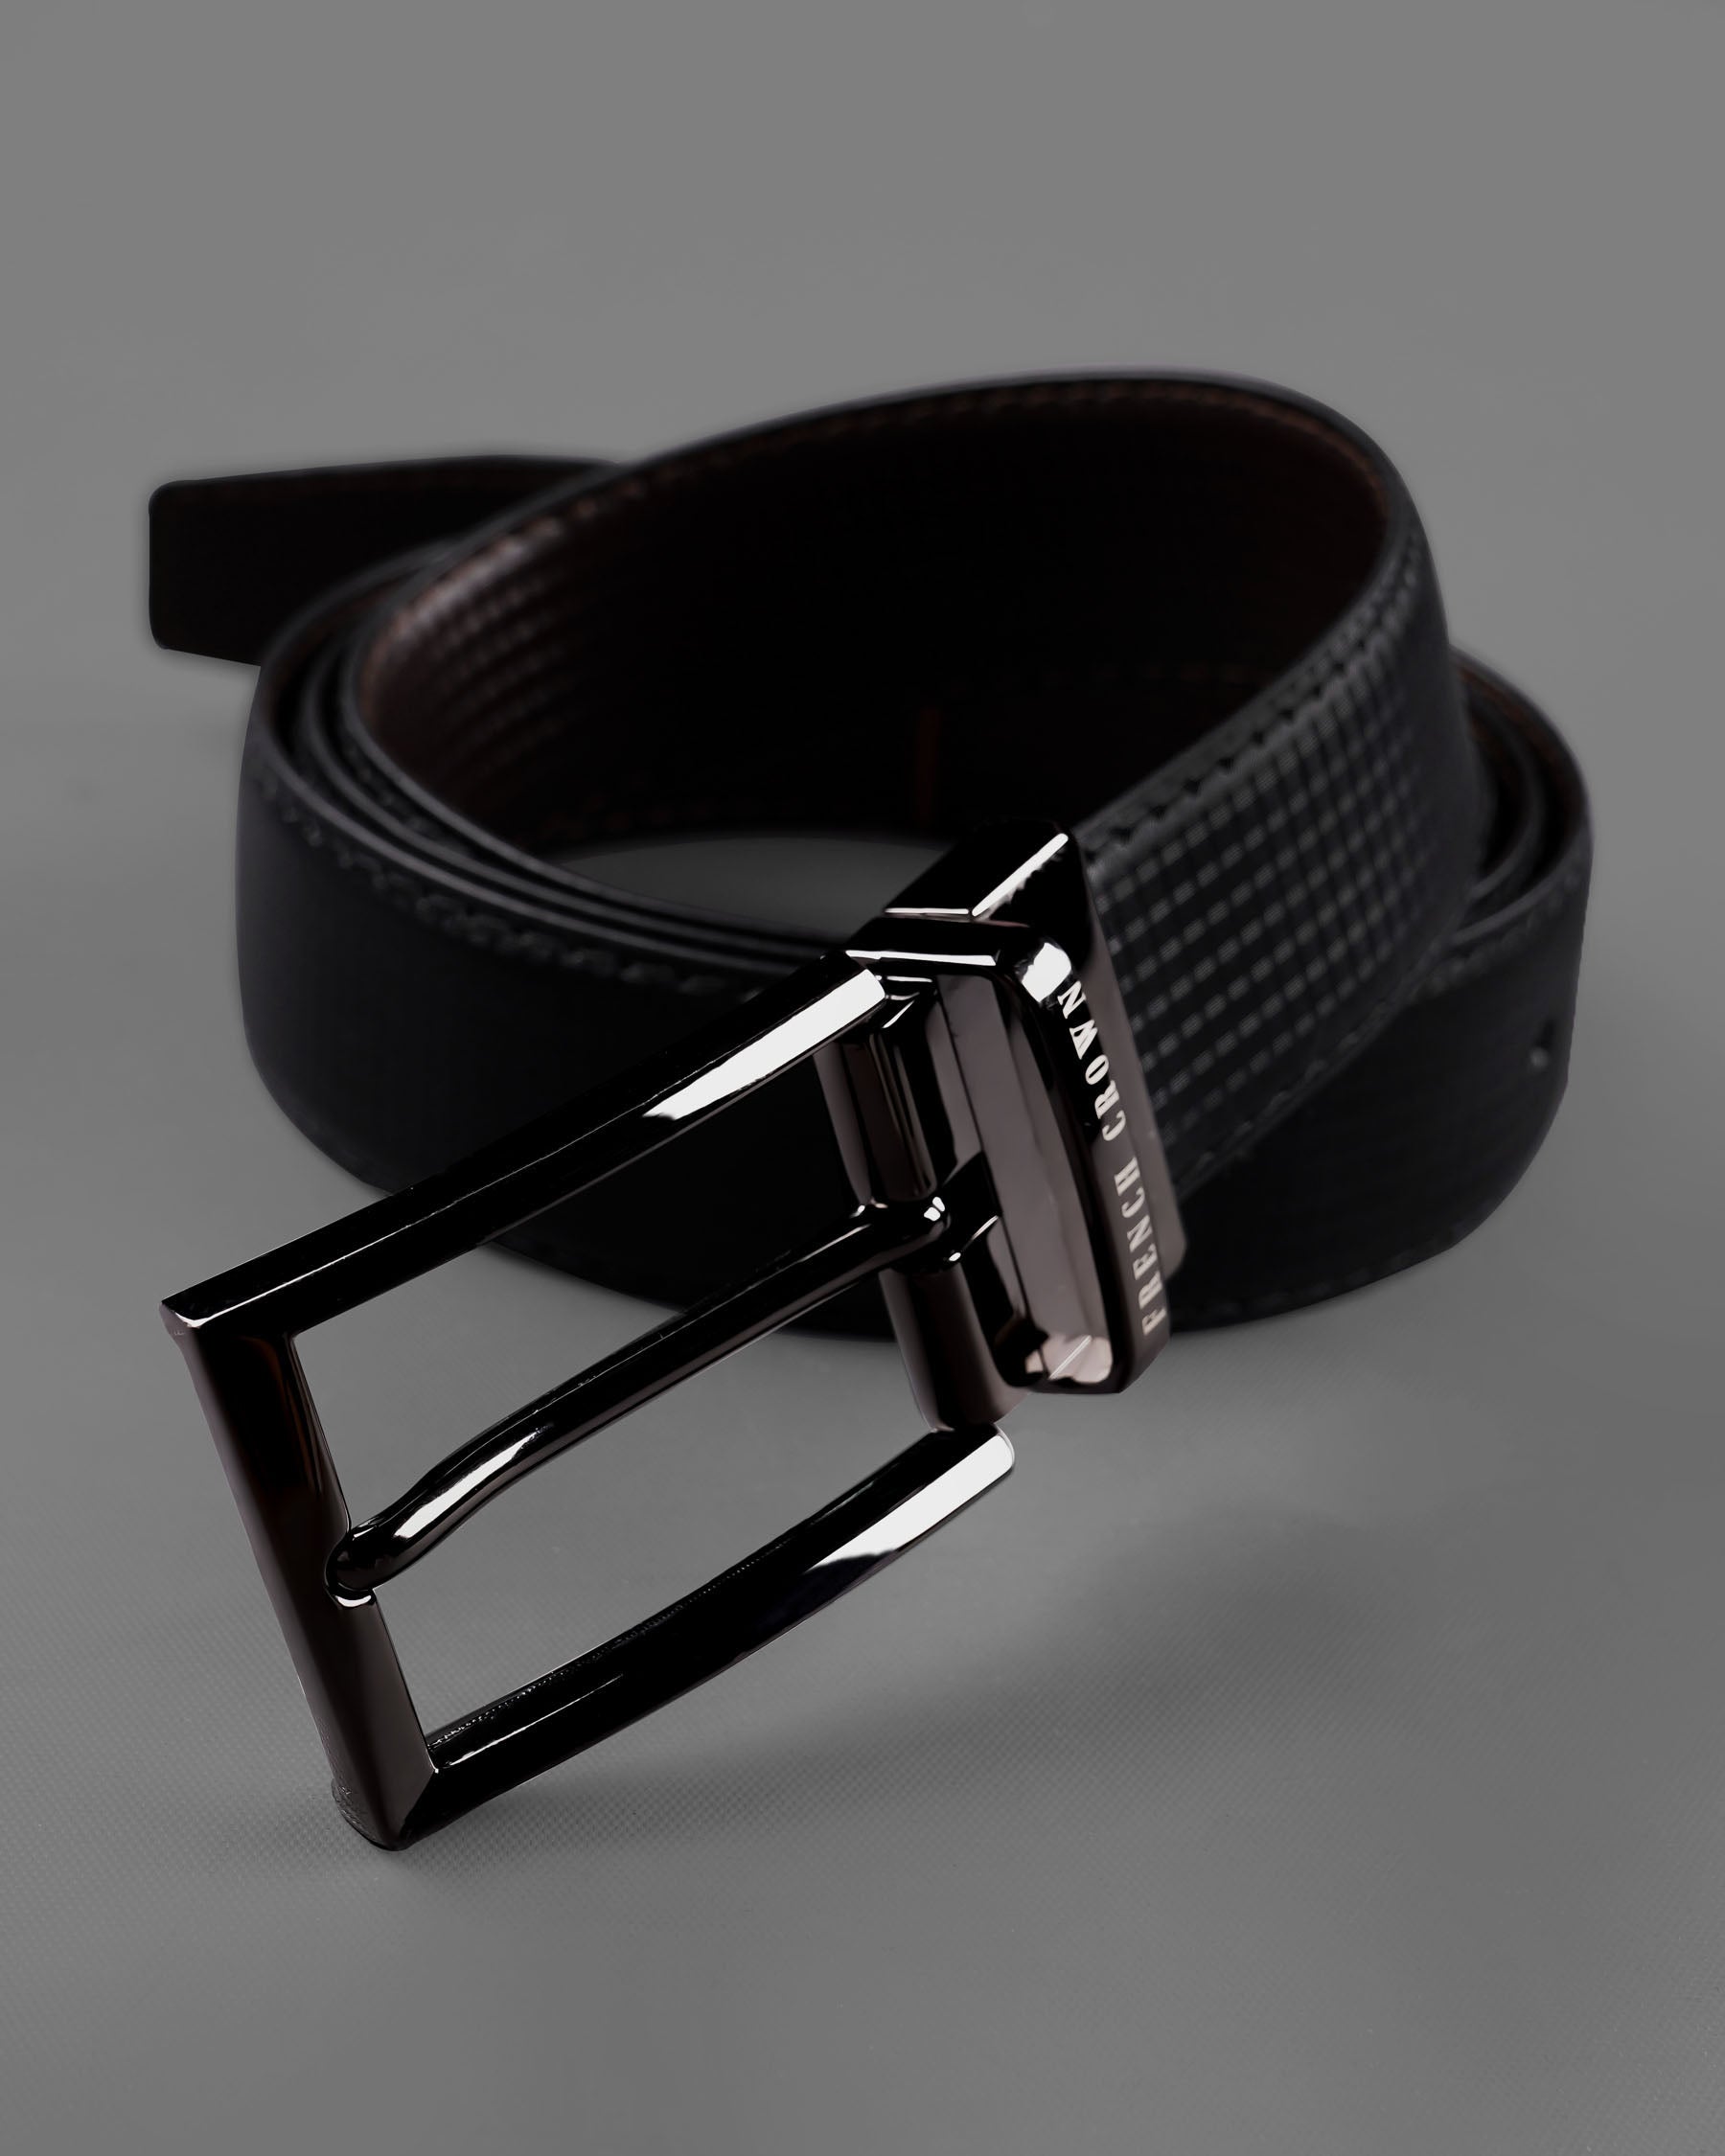 Metallic Silver Shiny Buckle with Jade Black and Brown Leather Free Handcrafted Reversible Belt BT085-28, BT085-30, BT085-32, BT085-34, BT085-36, BT085-38